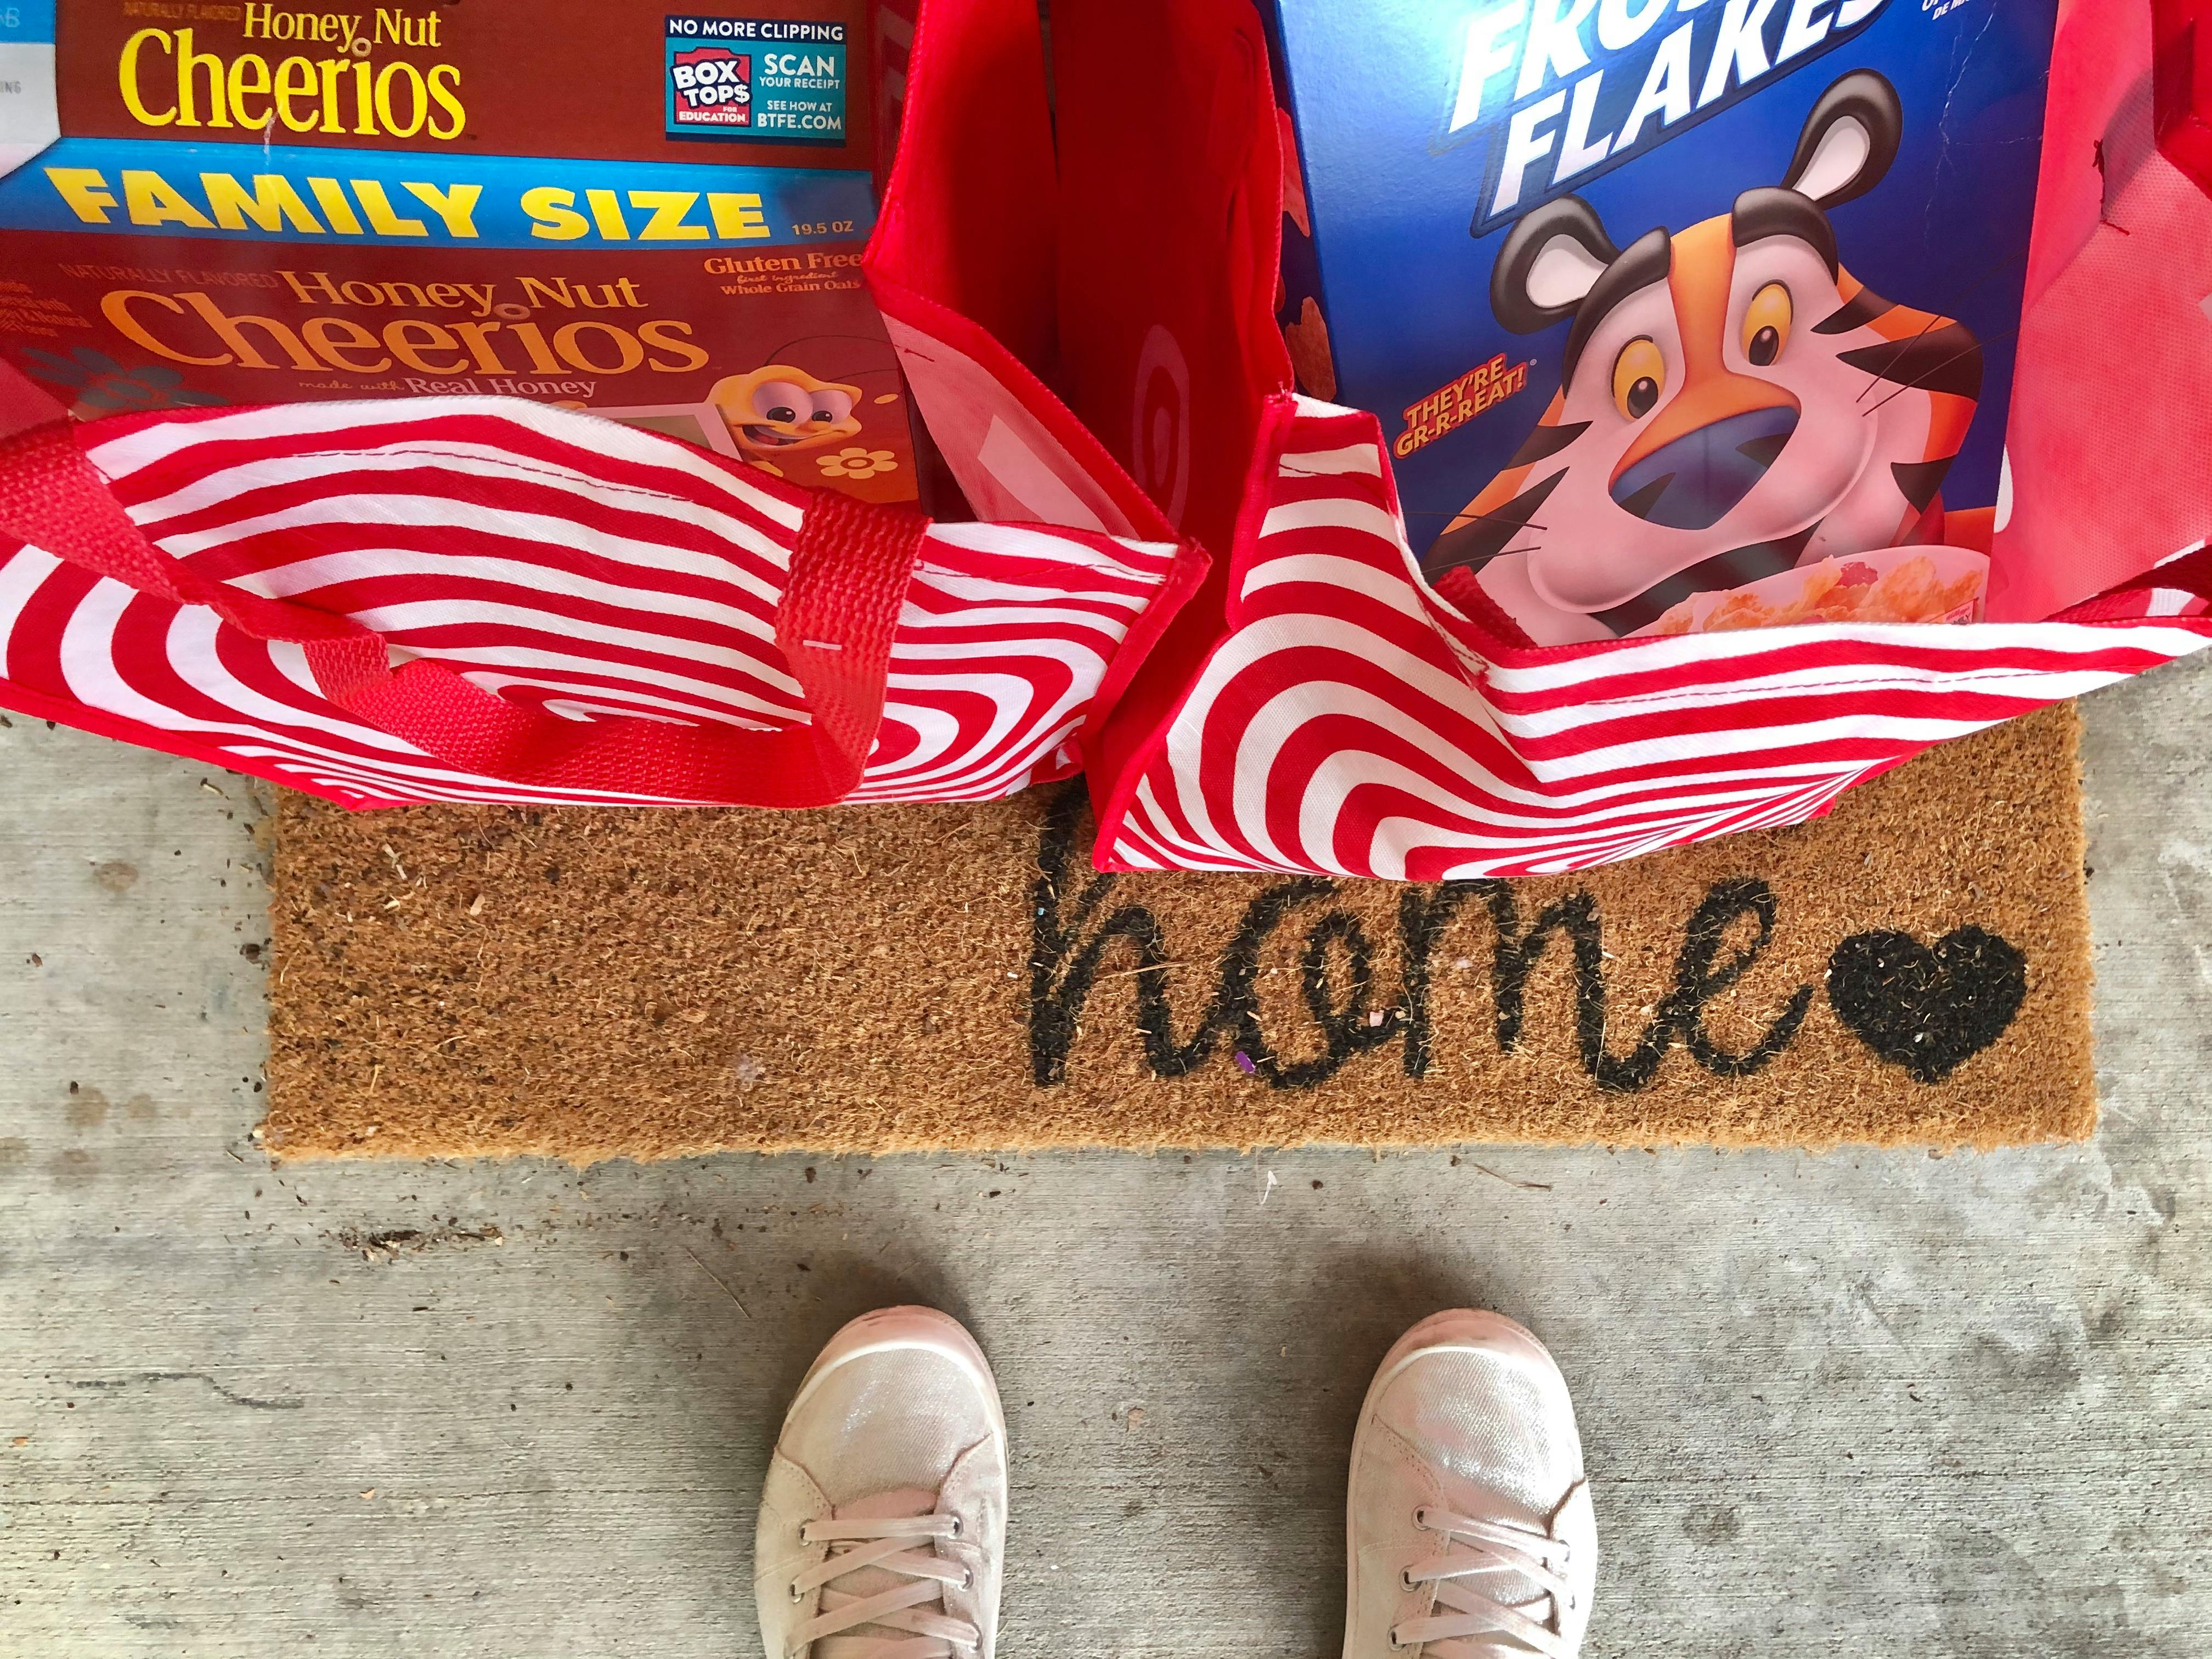 18 Unpublished Tips About Target Grocery Delivery Via Shipt - The Krazy Coupon Lady